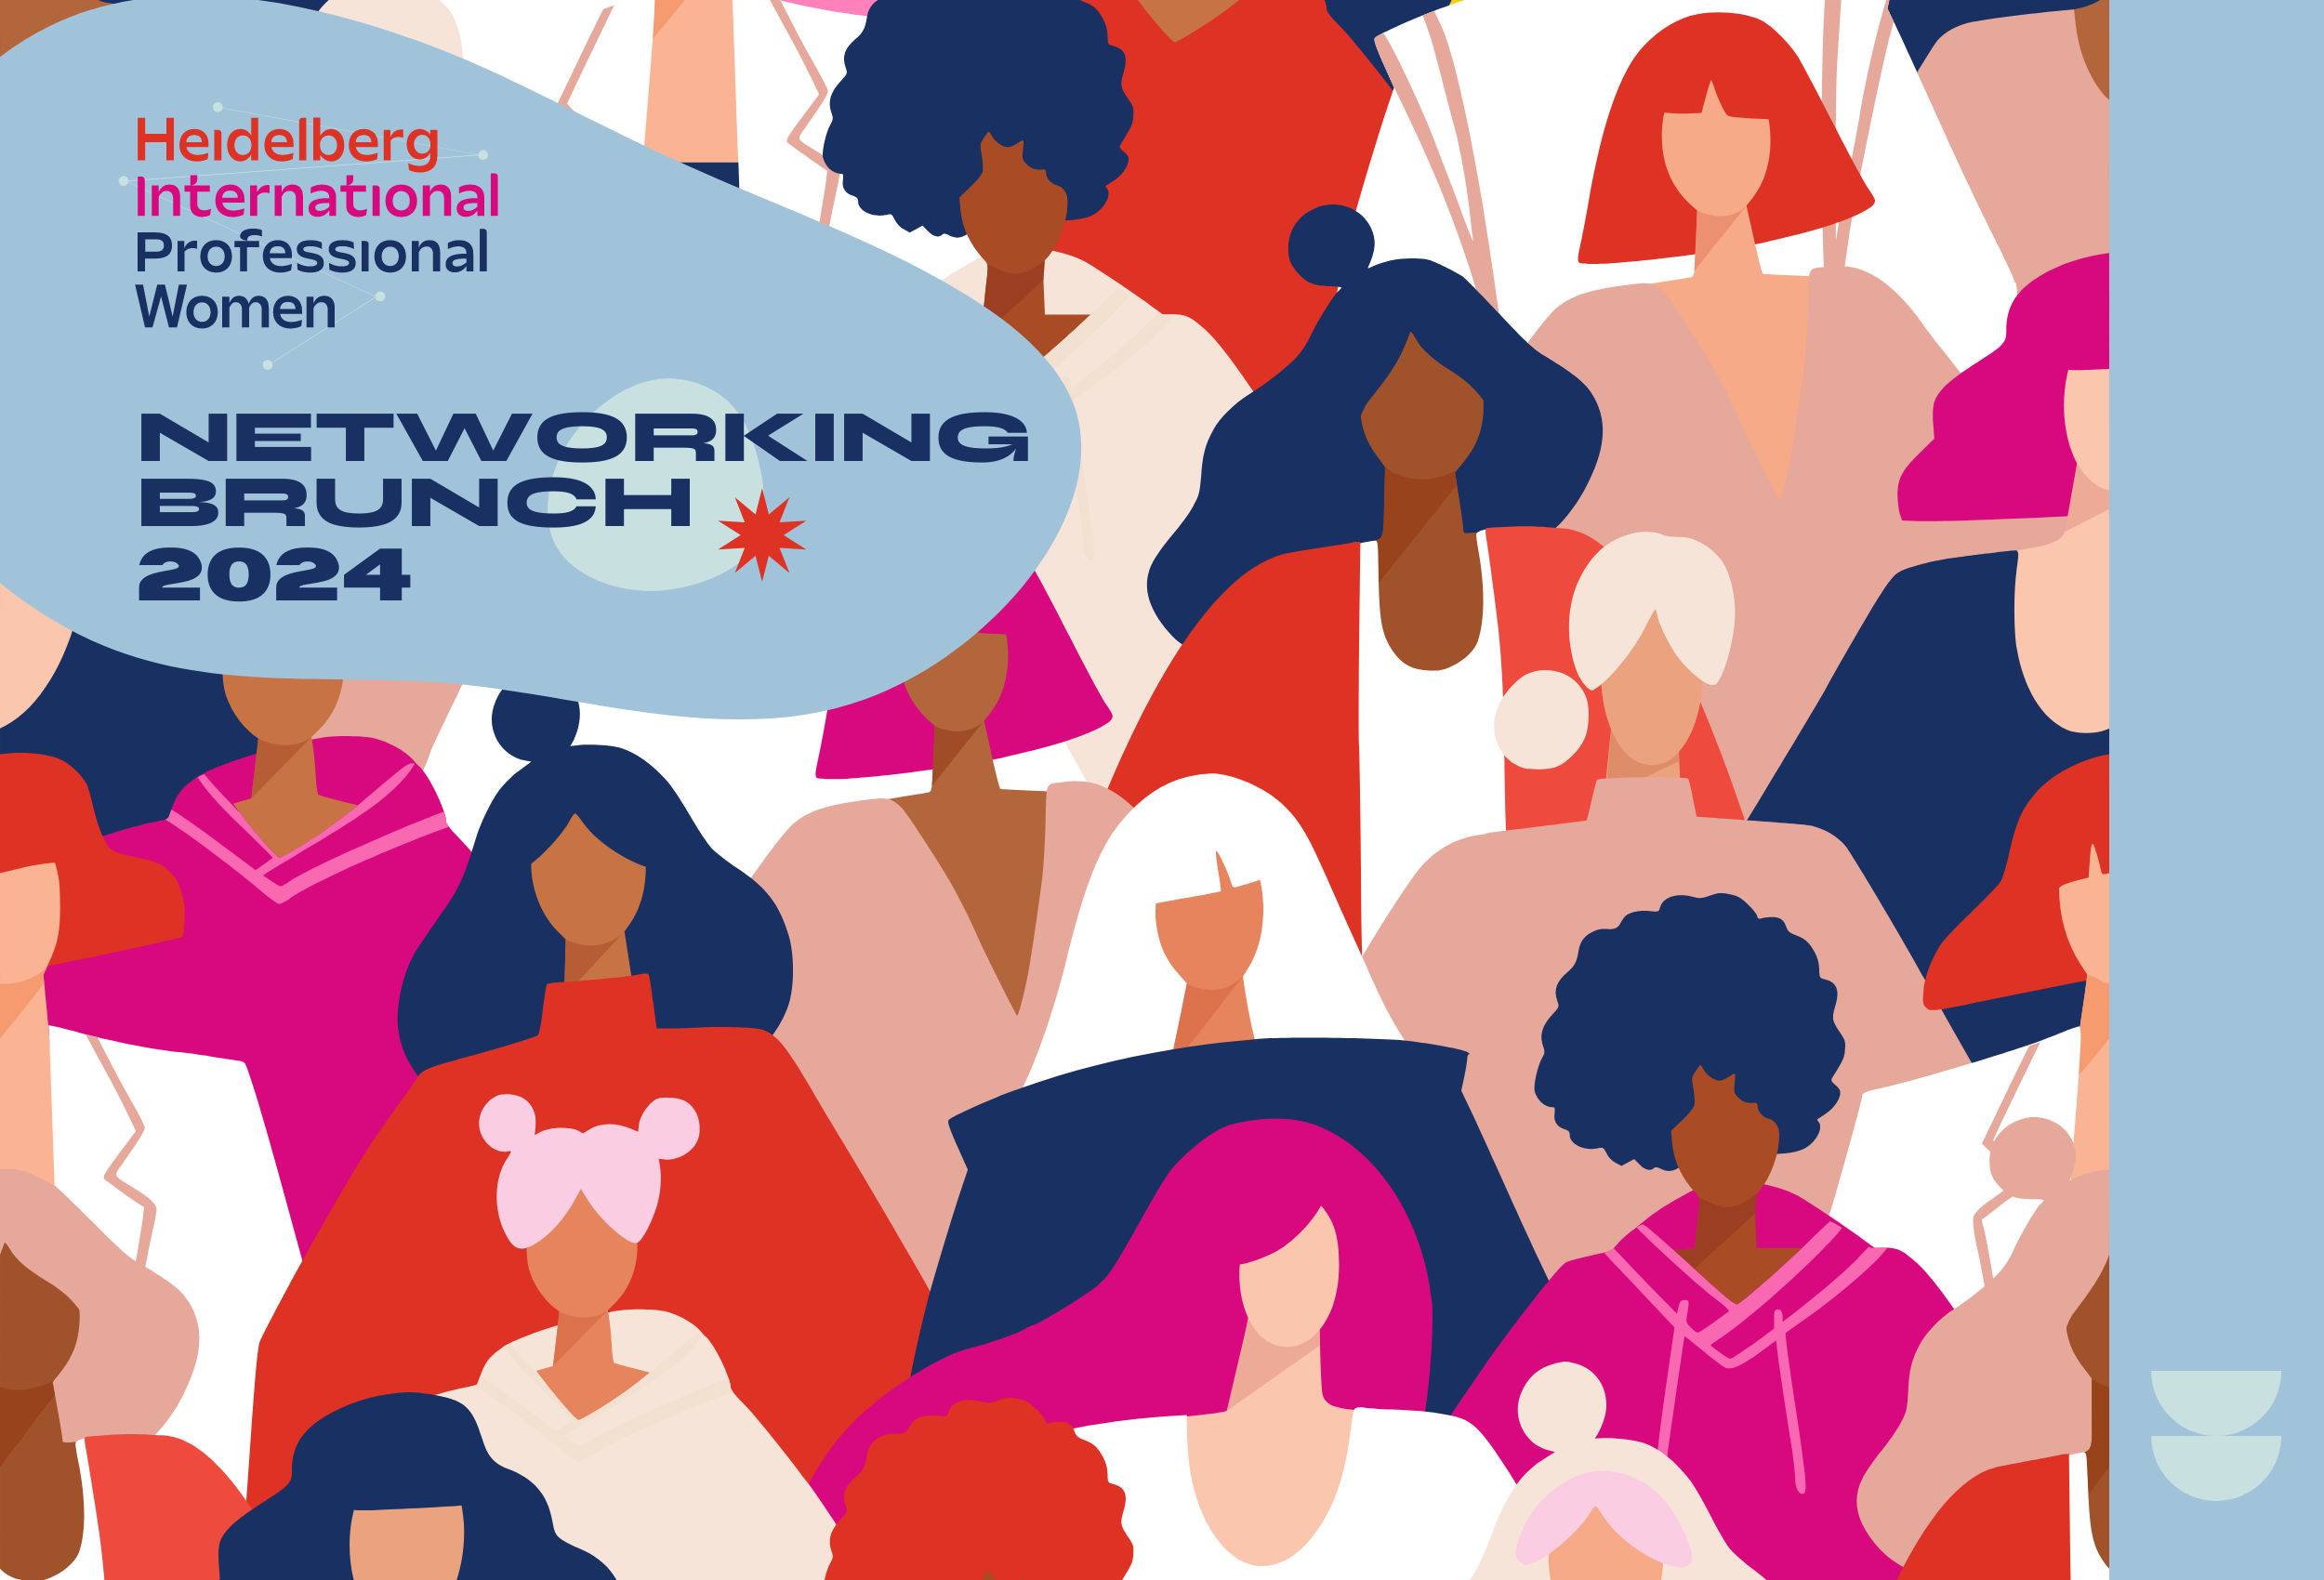 Save the Date: HIP Networking Brunch 2024 on October 19, 2024